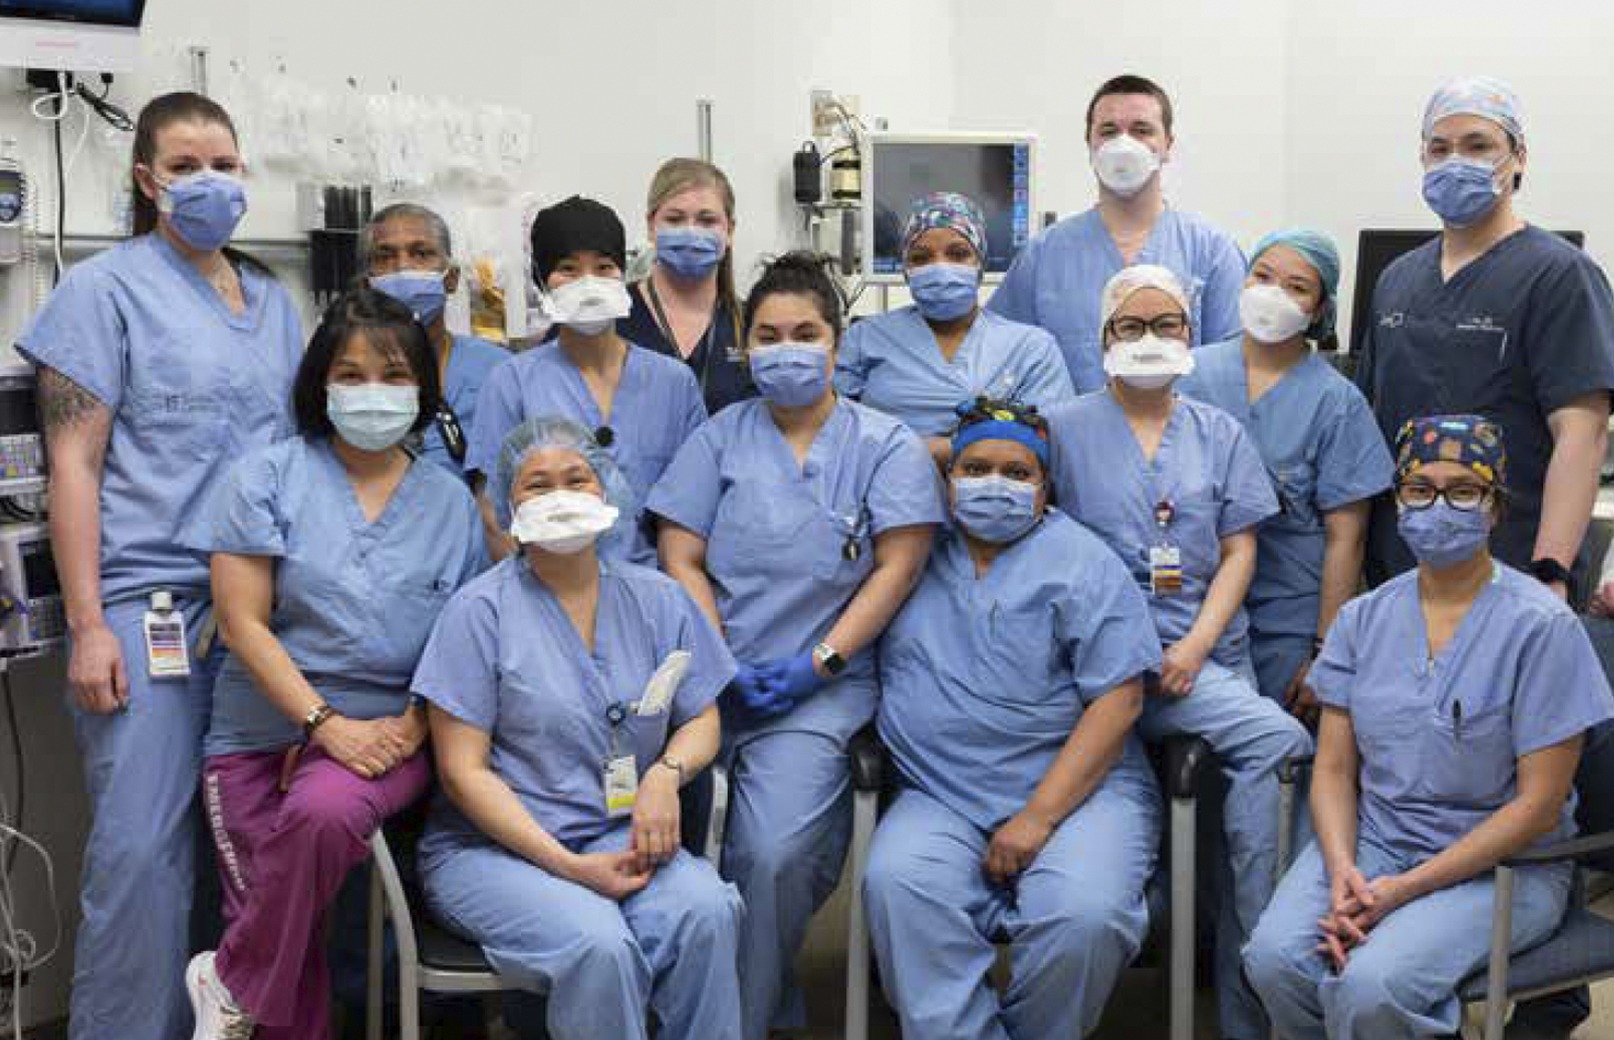 Group photo of Emergency Department team